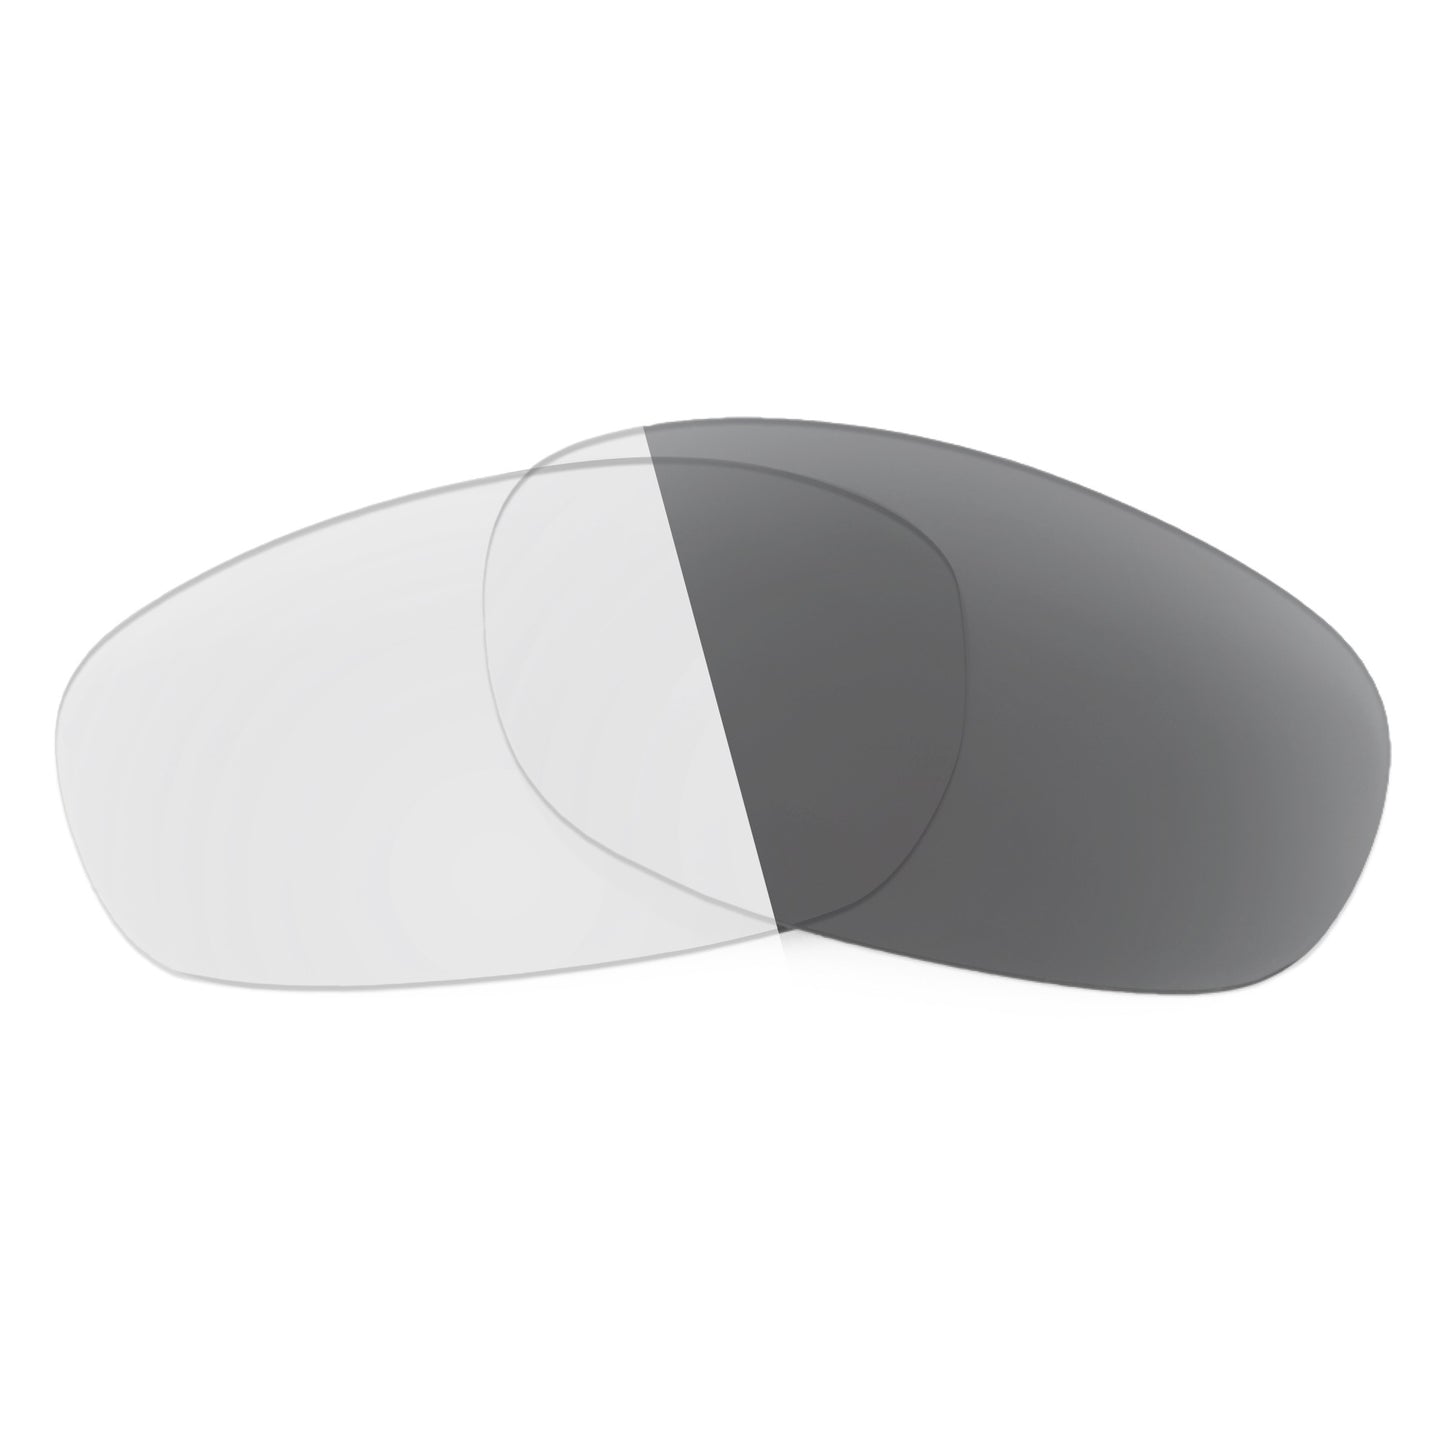 Revant replacement lenses for Ray-Ban Balorama L2870 B&L Non-Polarized Adapt Gray Photochromic